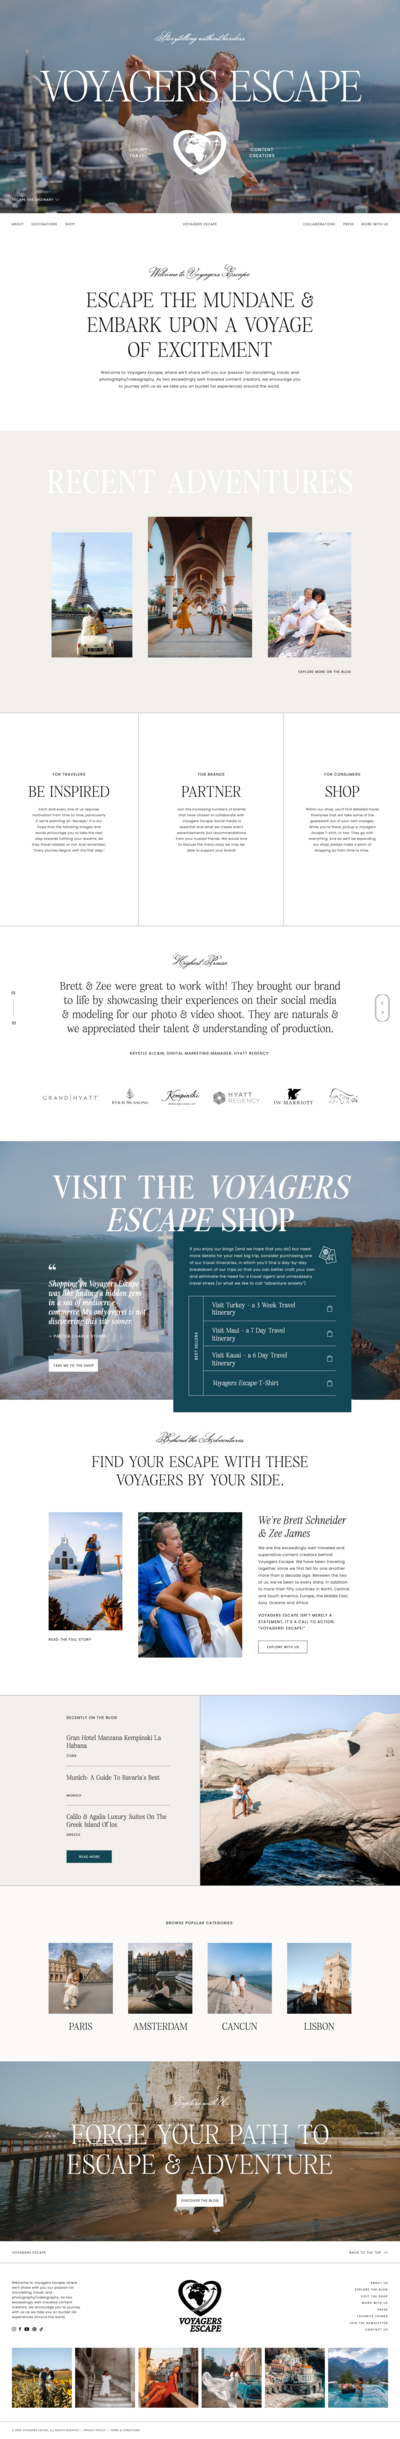 Showit template customization for Voyagers Escape, travel bloggers and content creators for luxury brands